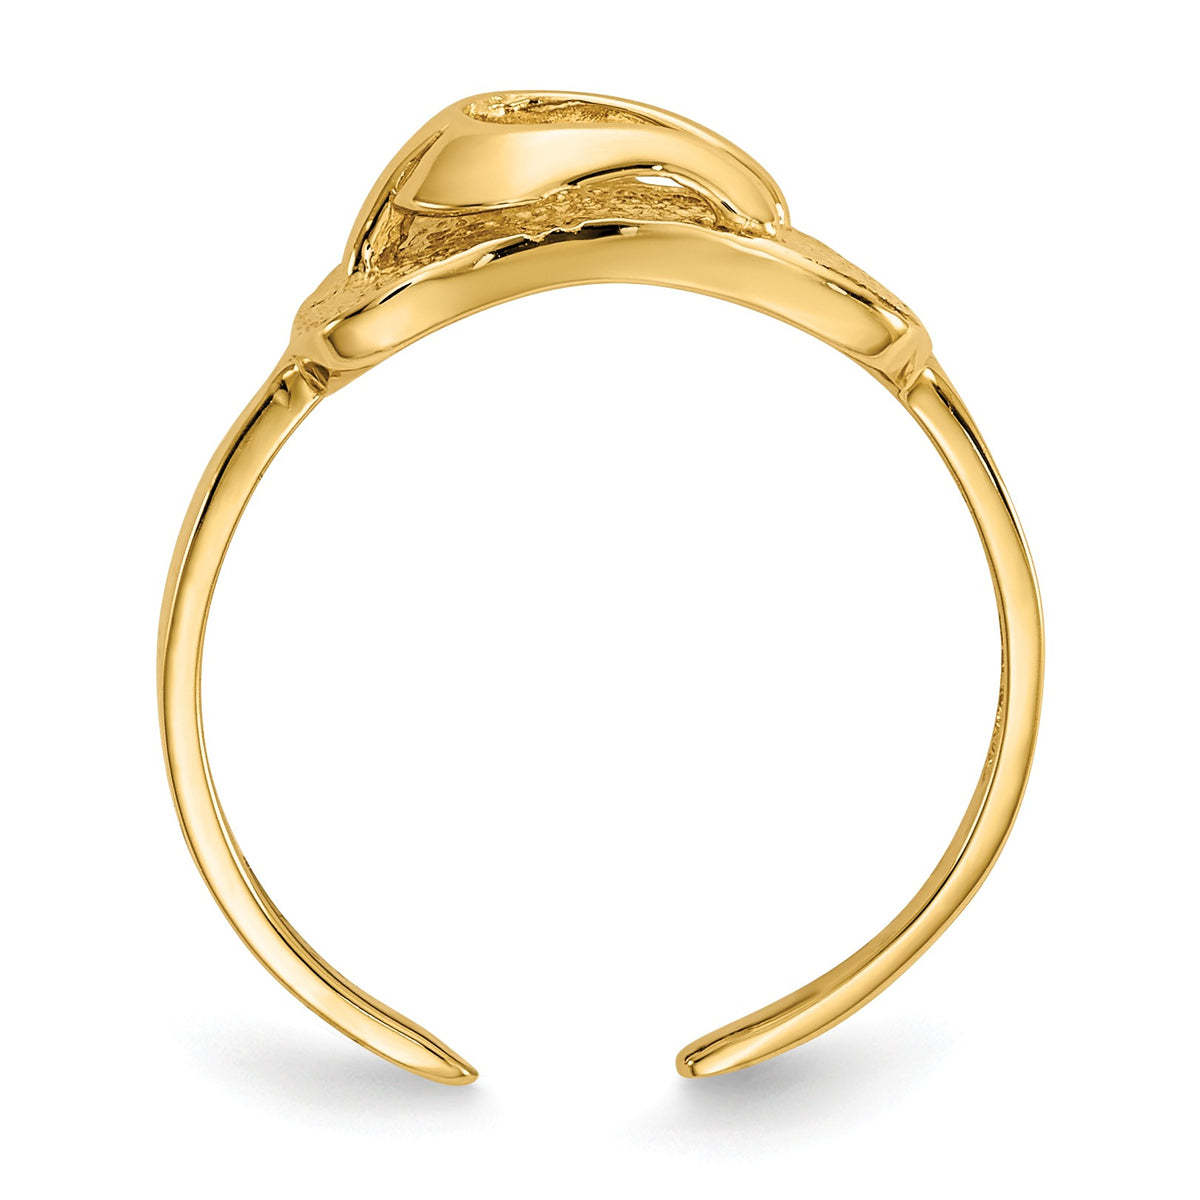 Alternate view of the Sandal Toe Ring in 14 Karat Gold by The Black Bow Jewelry Co.